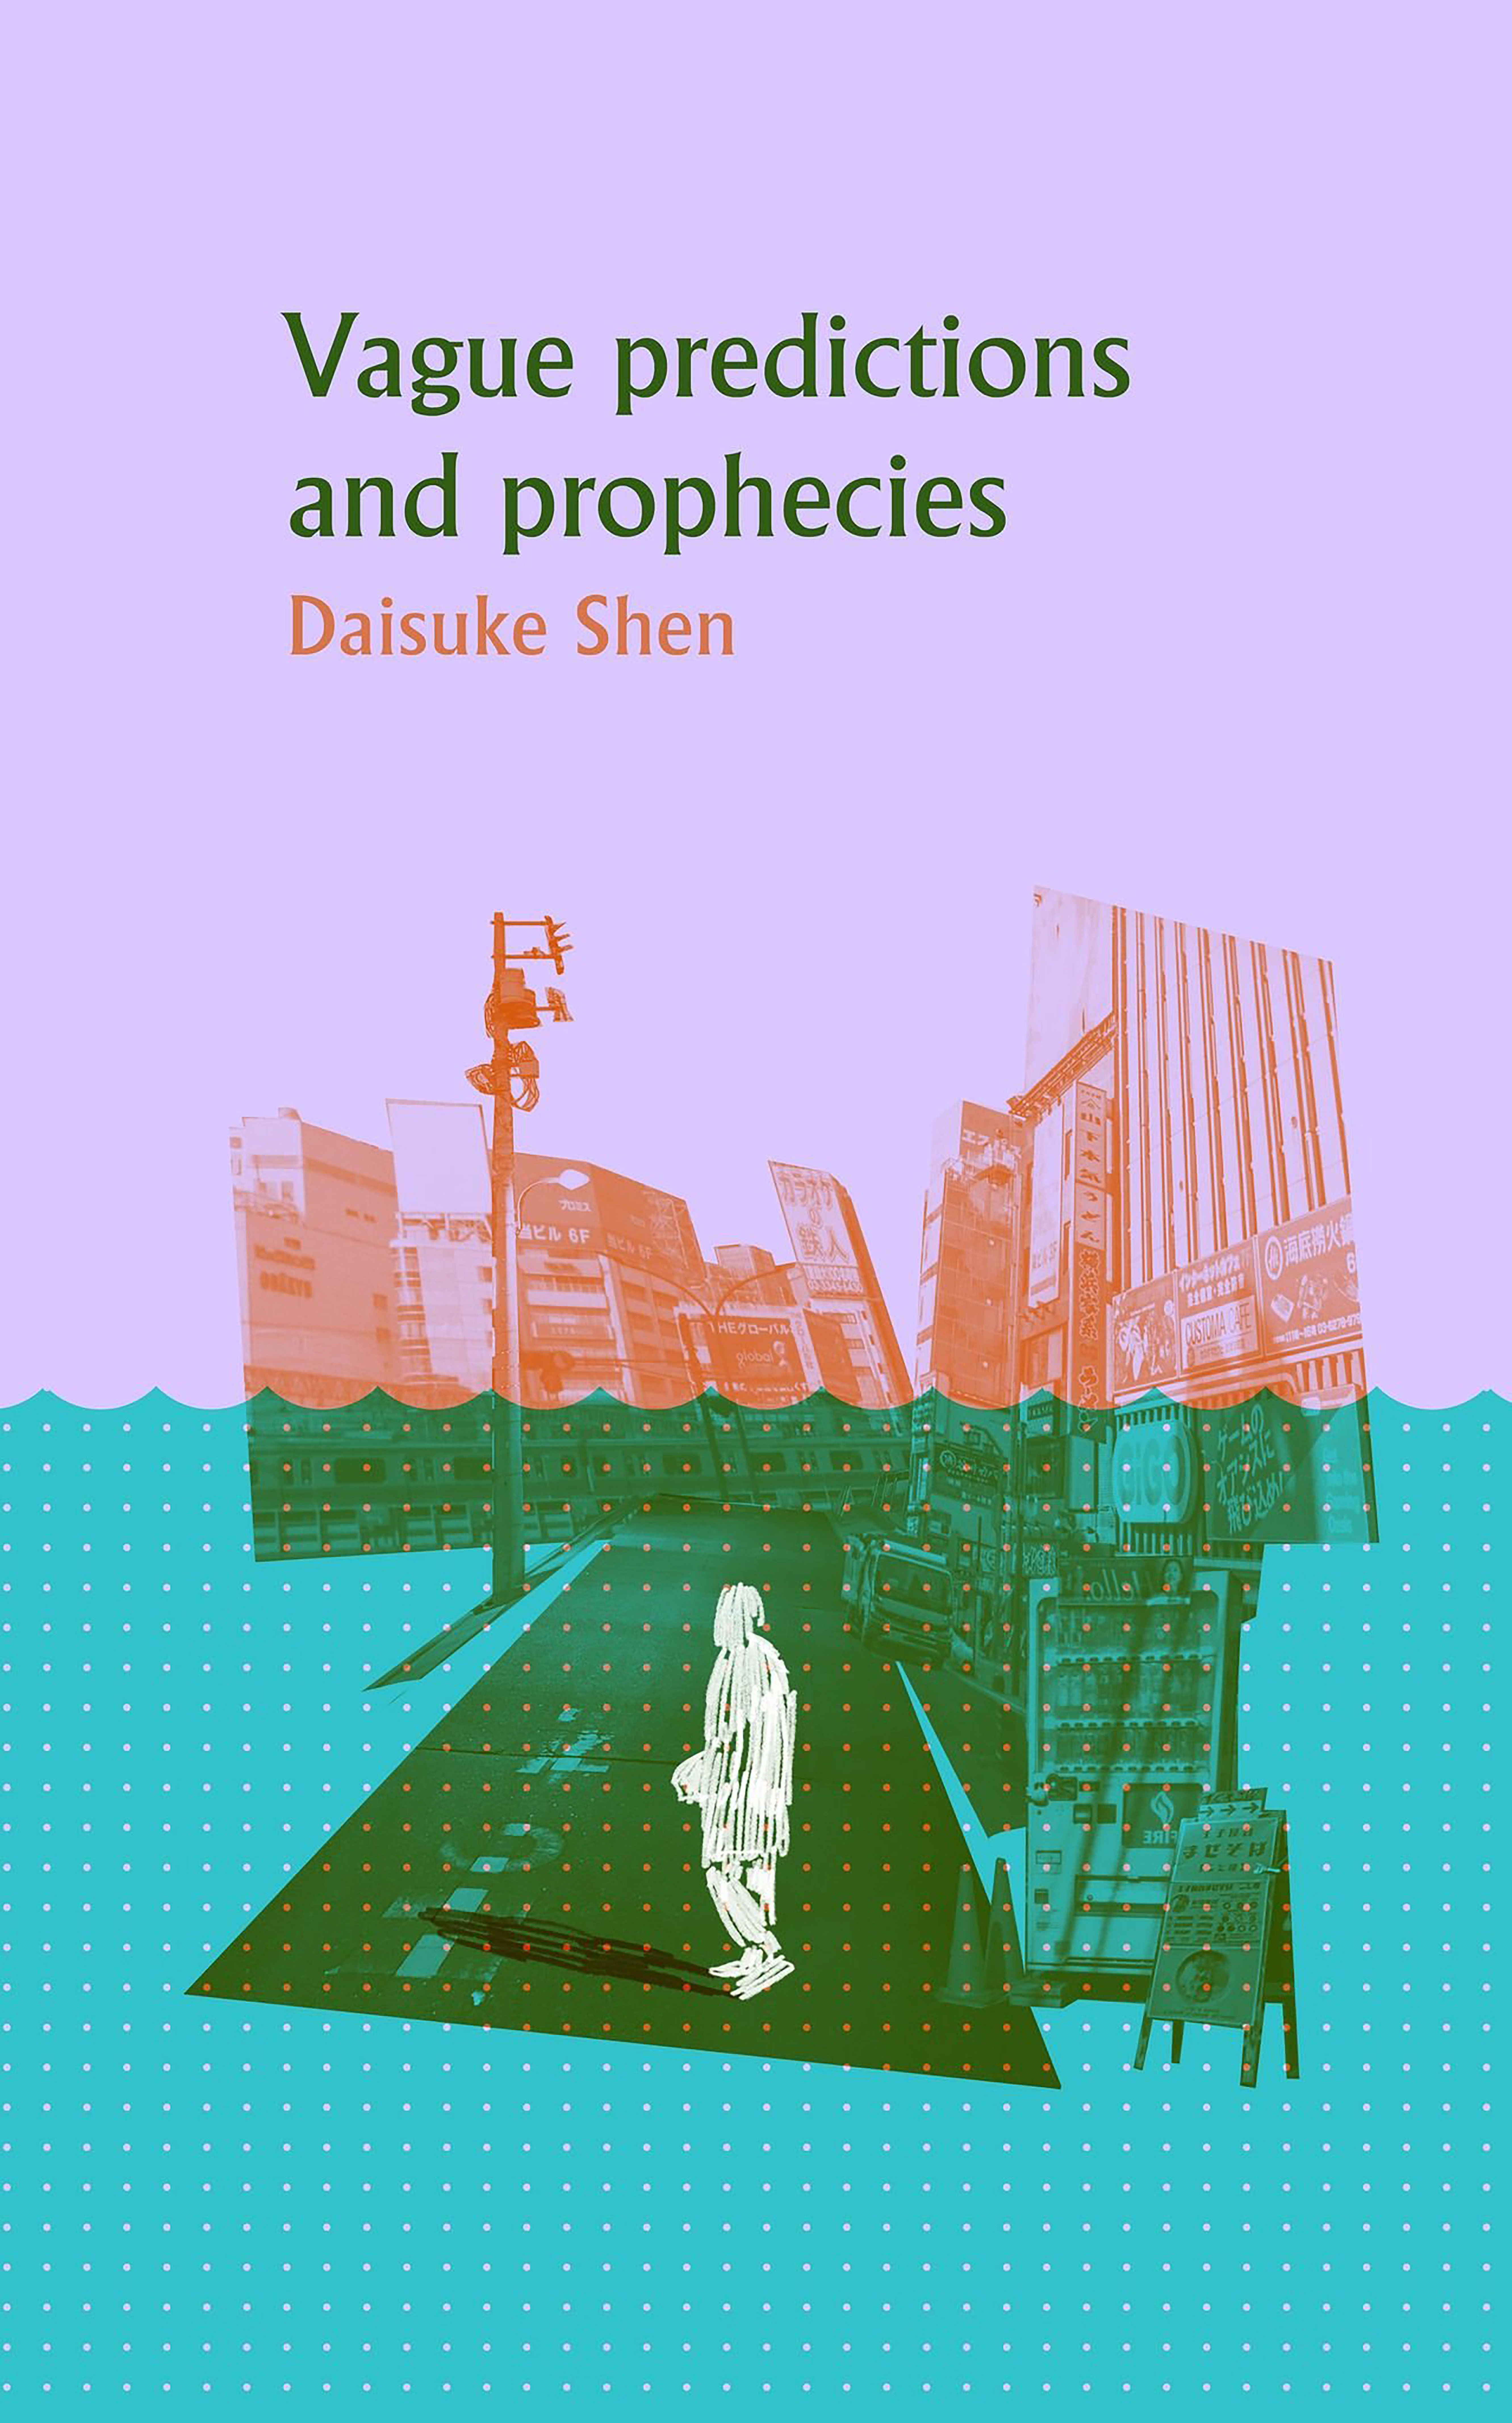 Book Launch: Vague Predictions & Prophecies by Daisuke Shen featuring readings from Christopher Rey Perez and Mayada Ibrahim with music from Christian Michael Filardo